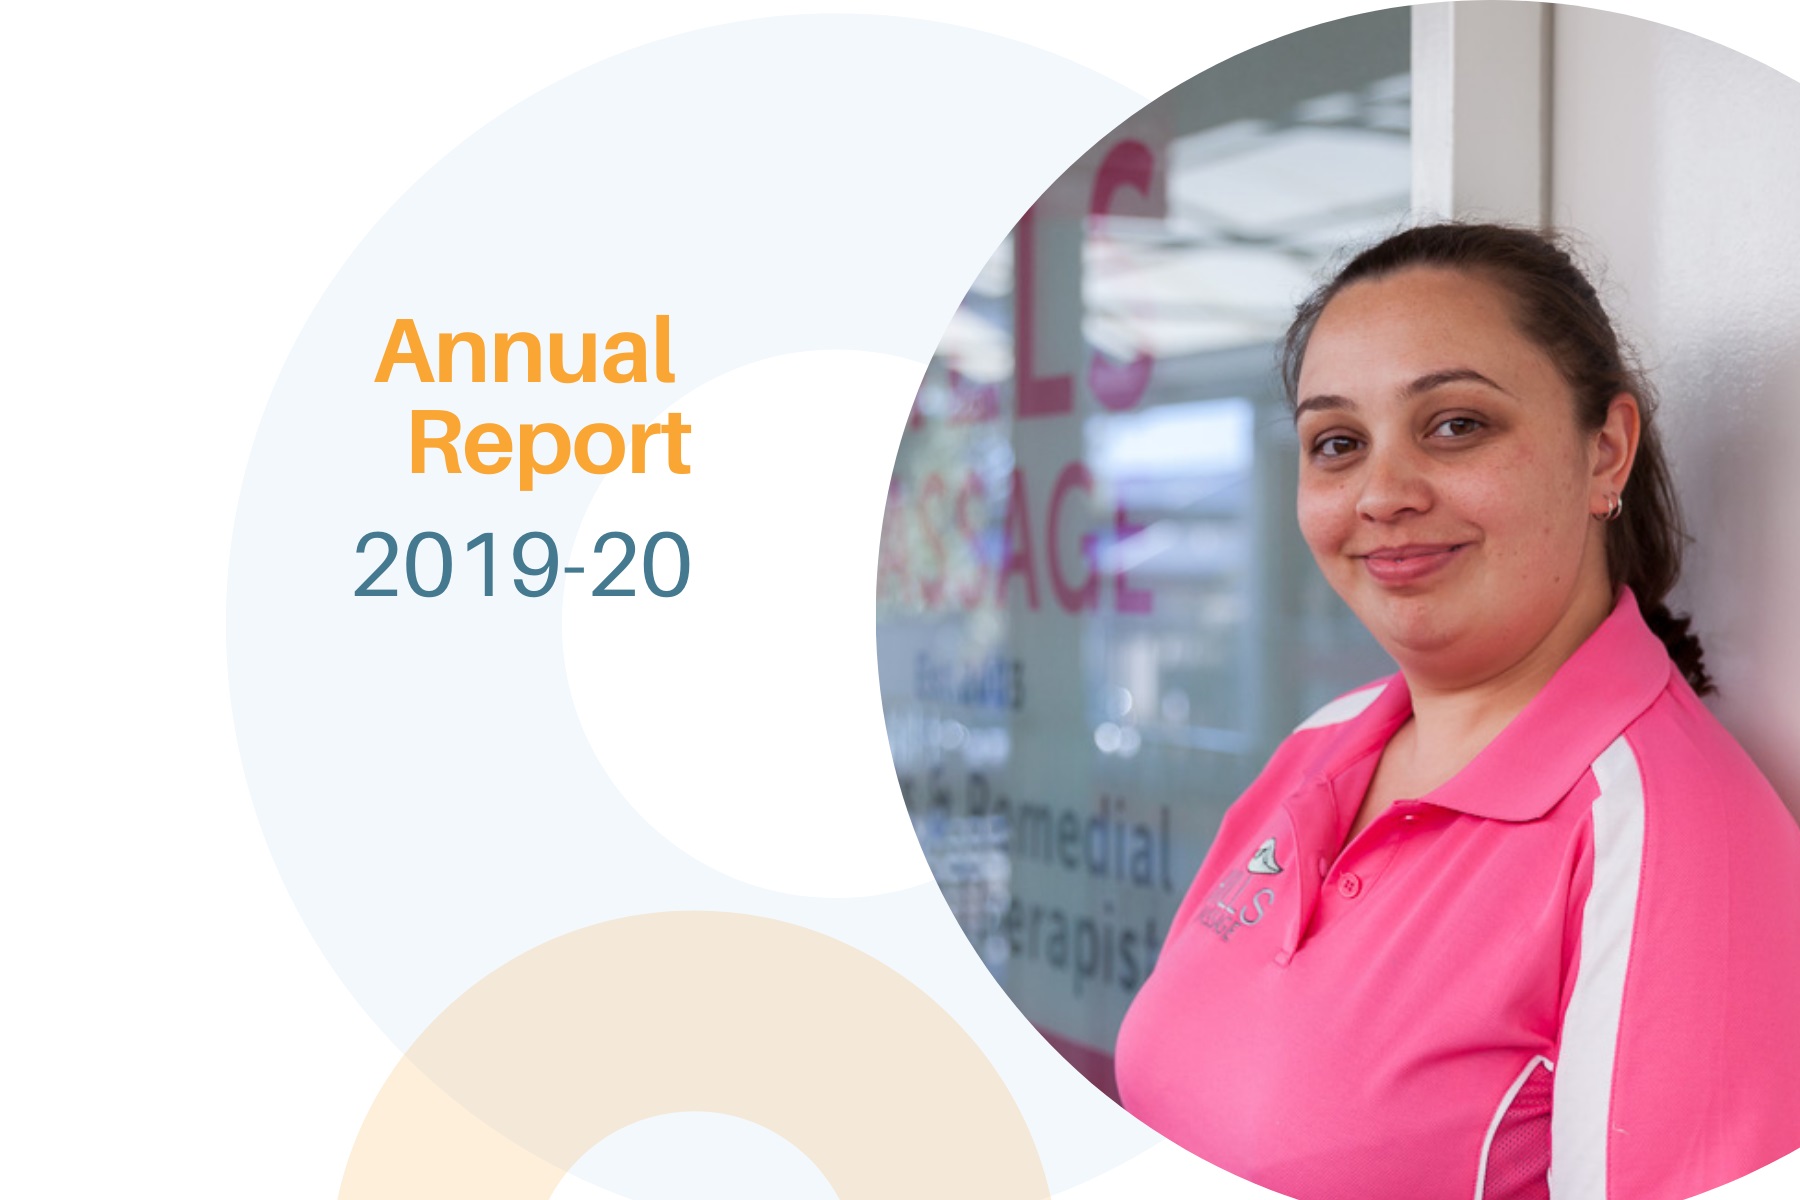 Photo of a small business owner and heading Annual Report 2019-20.